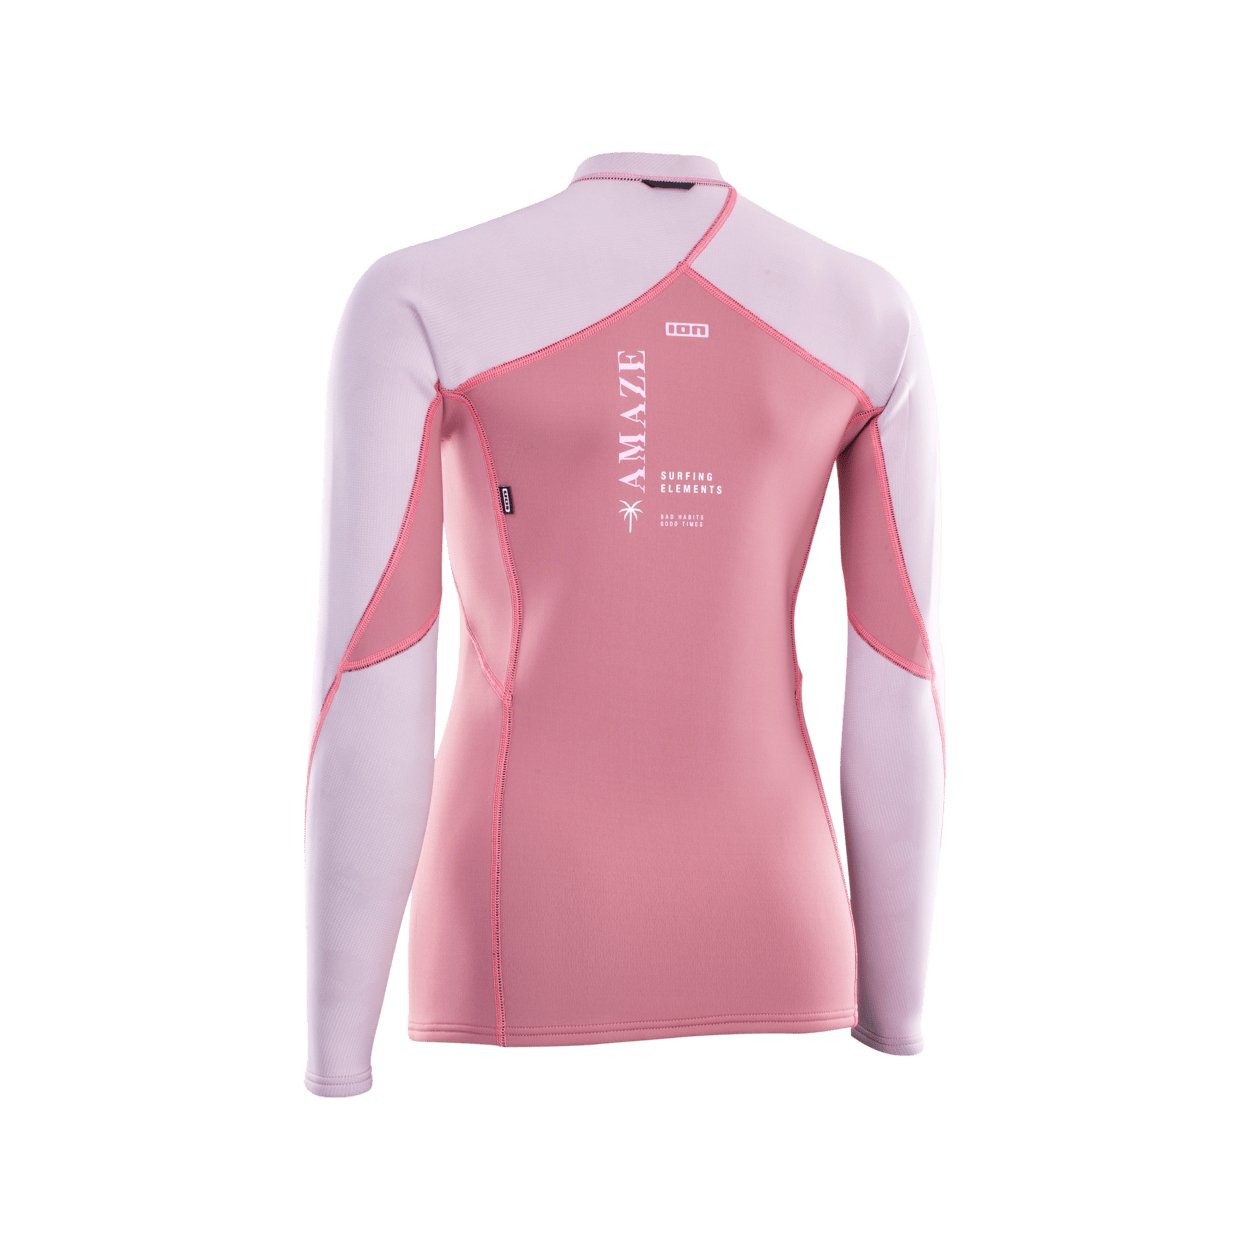 ION Neo Top Women 2/2 LS 2021 - Worthing Watersports - 9008415955459 - Tops - ION Water